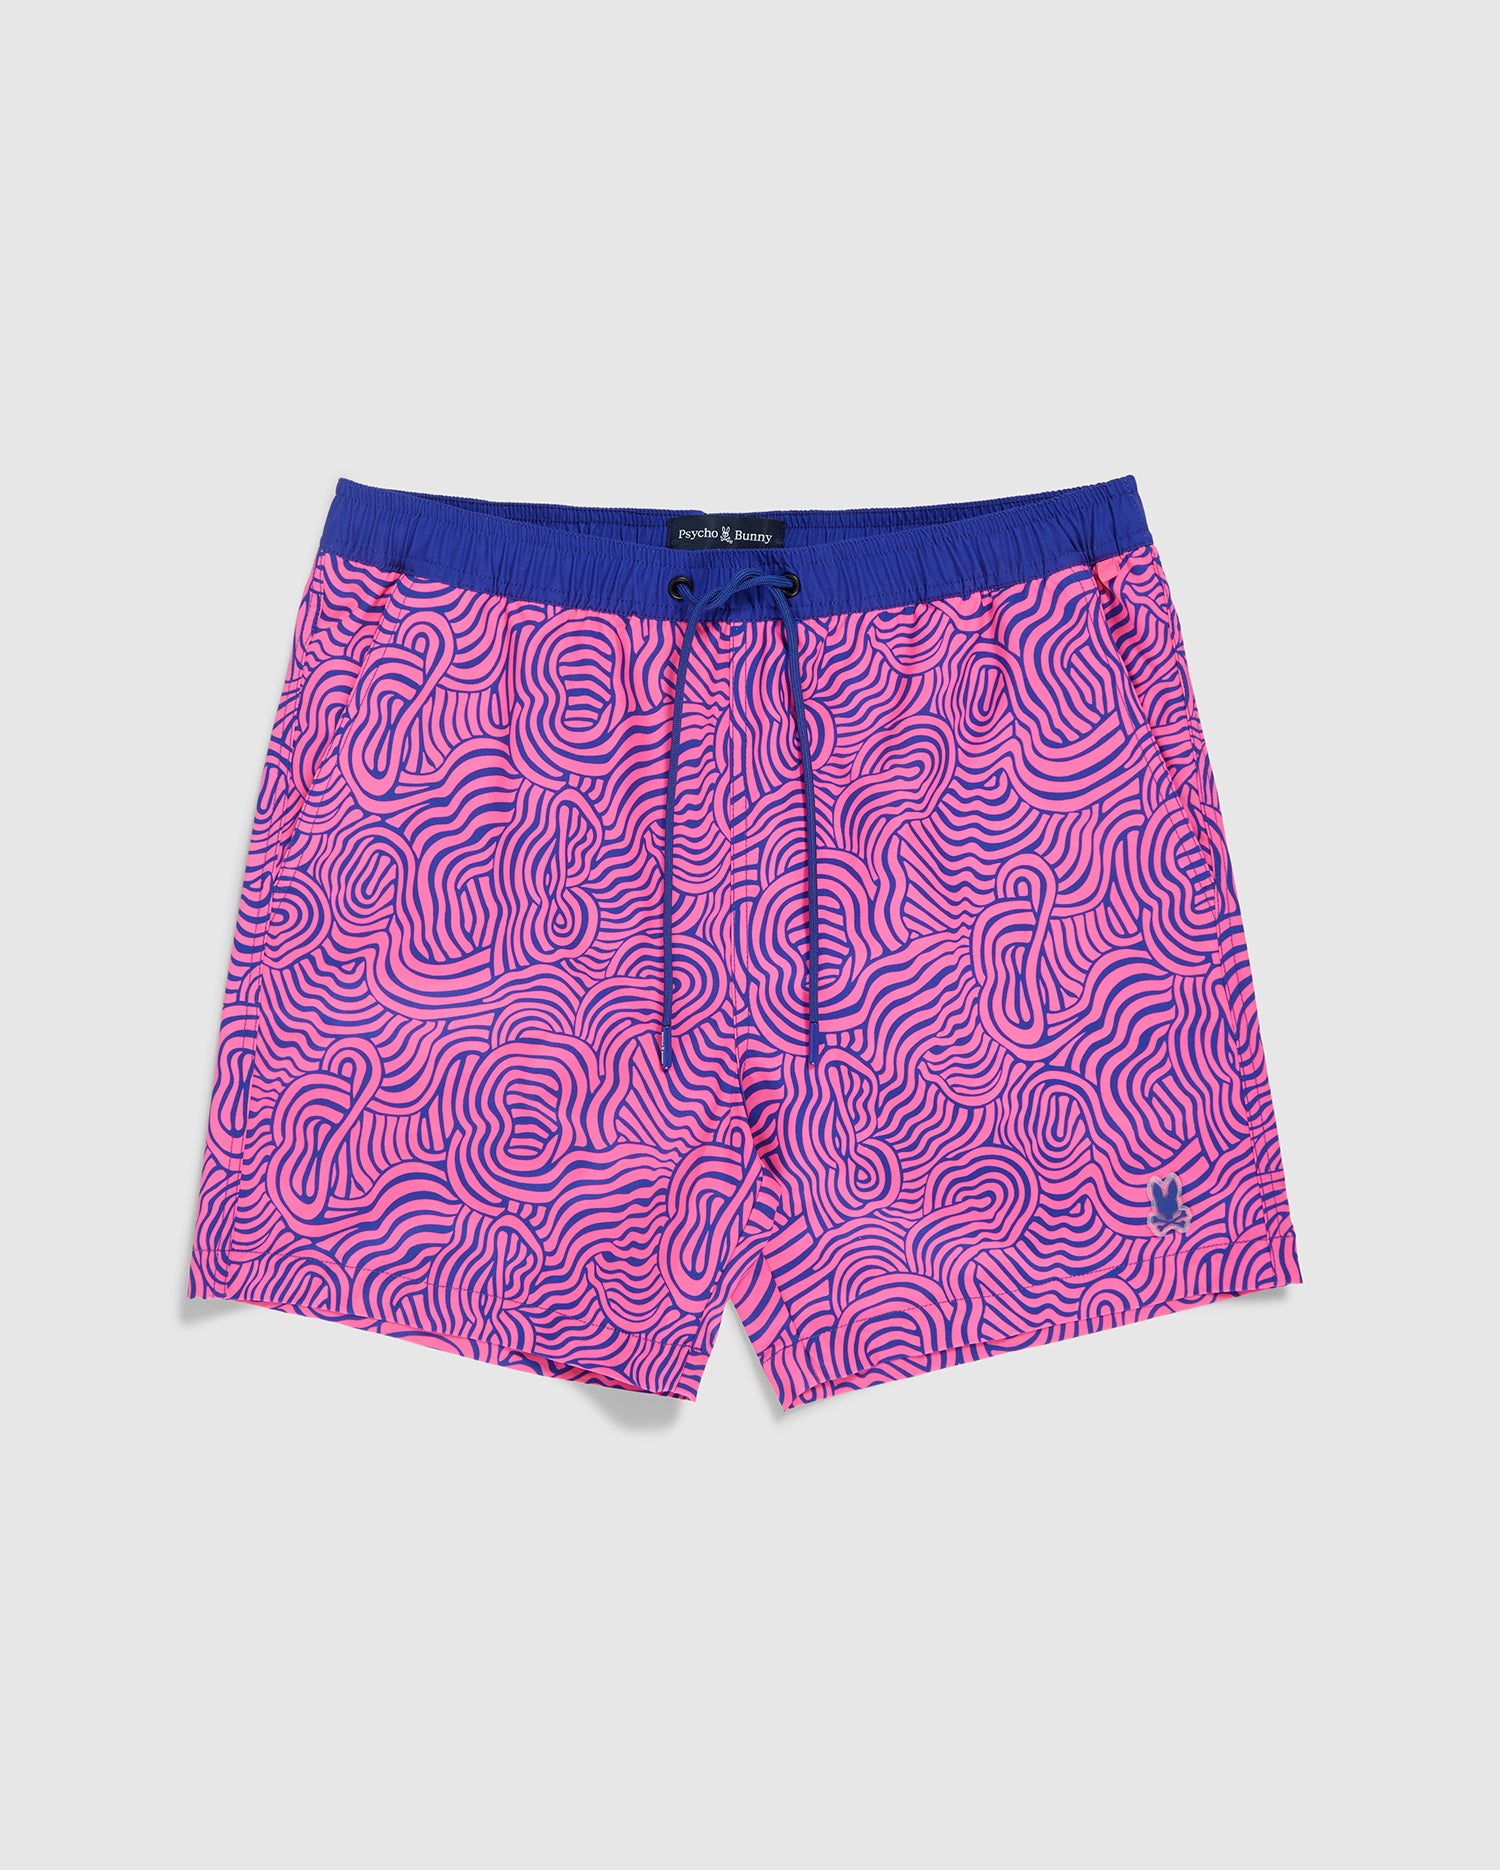 A pair of vibrant pink VERONA PRINT SWIM TRUNK - B6W172B2SW from Psycho Bunny featuring a wavy, maze-like blue pattern and made from quick-dry fabric. The waistband is solid blue with a matching drawstring at the center. Complete with a comfortable mesh lining and a small embroidered logo on one leg near the hem.